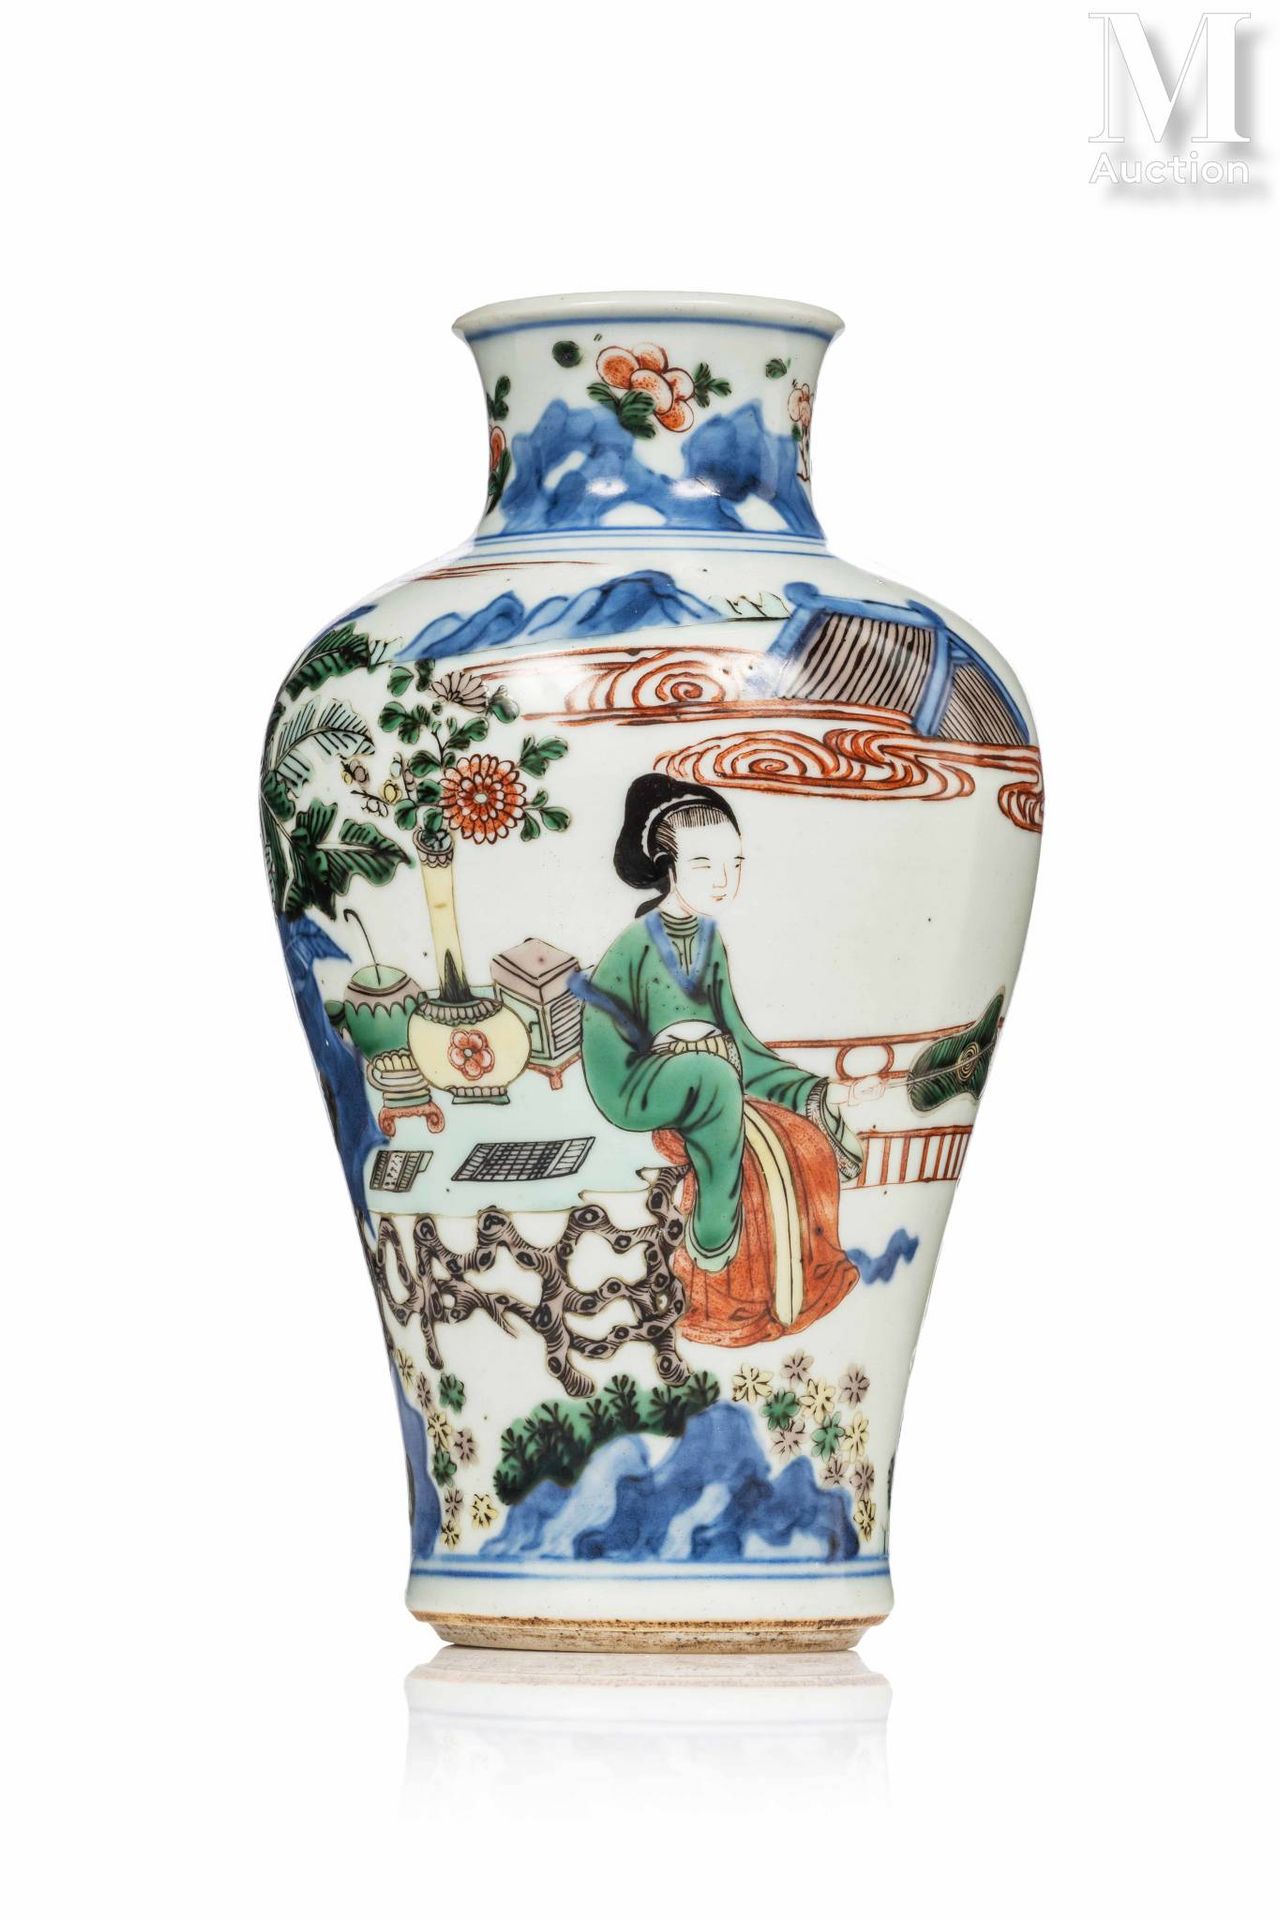 *CHINE, Epoque Transition, XVIIe siècle Small porcelain vase

with a narrow base&hellip;